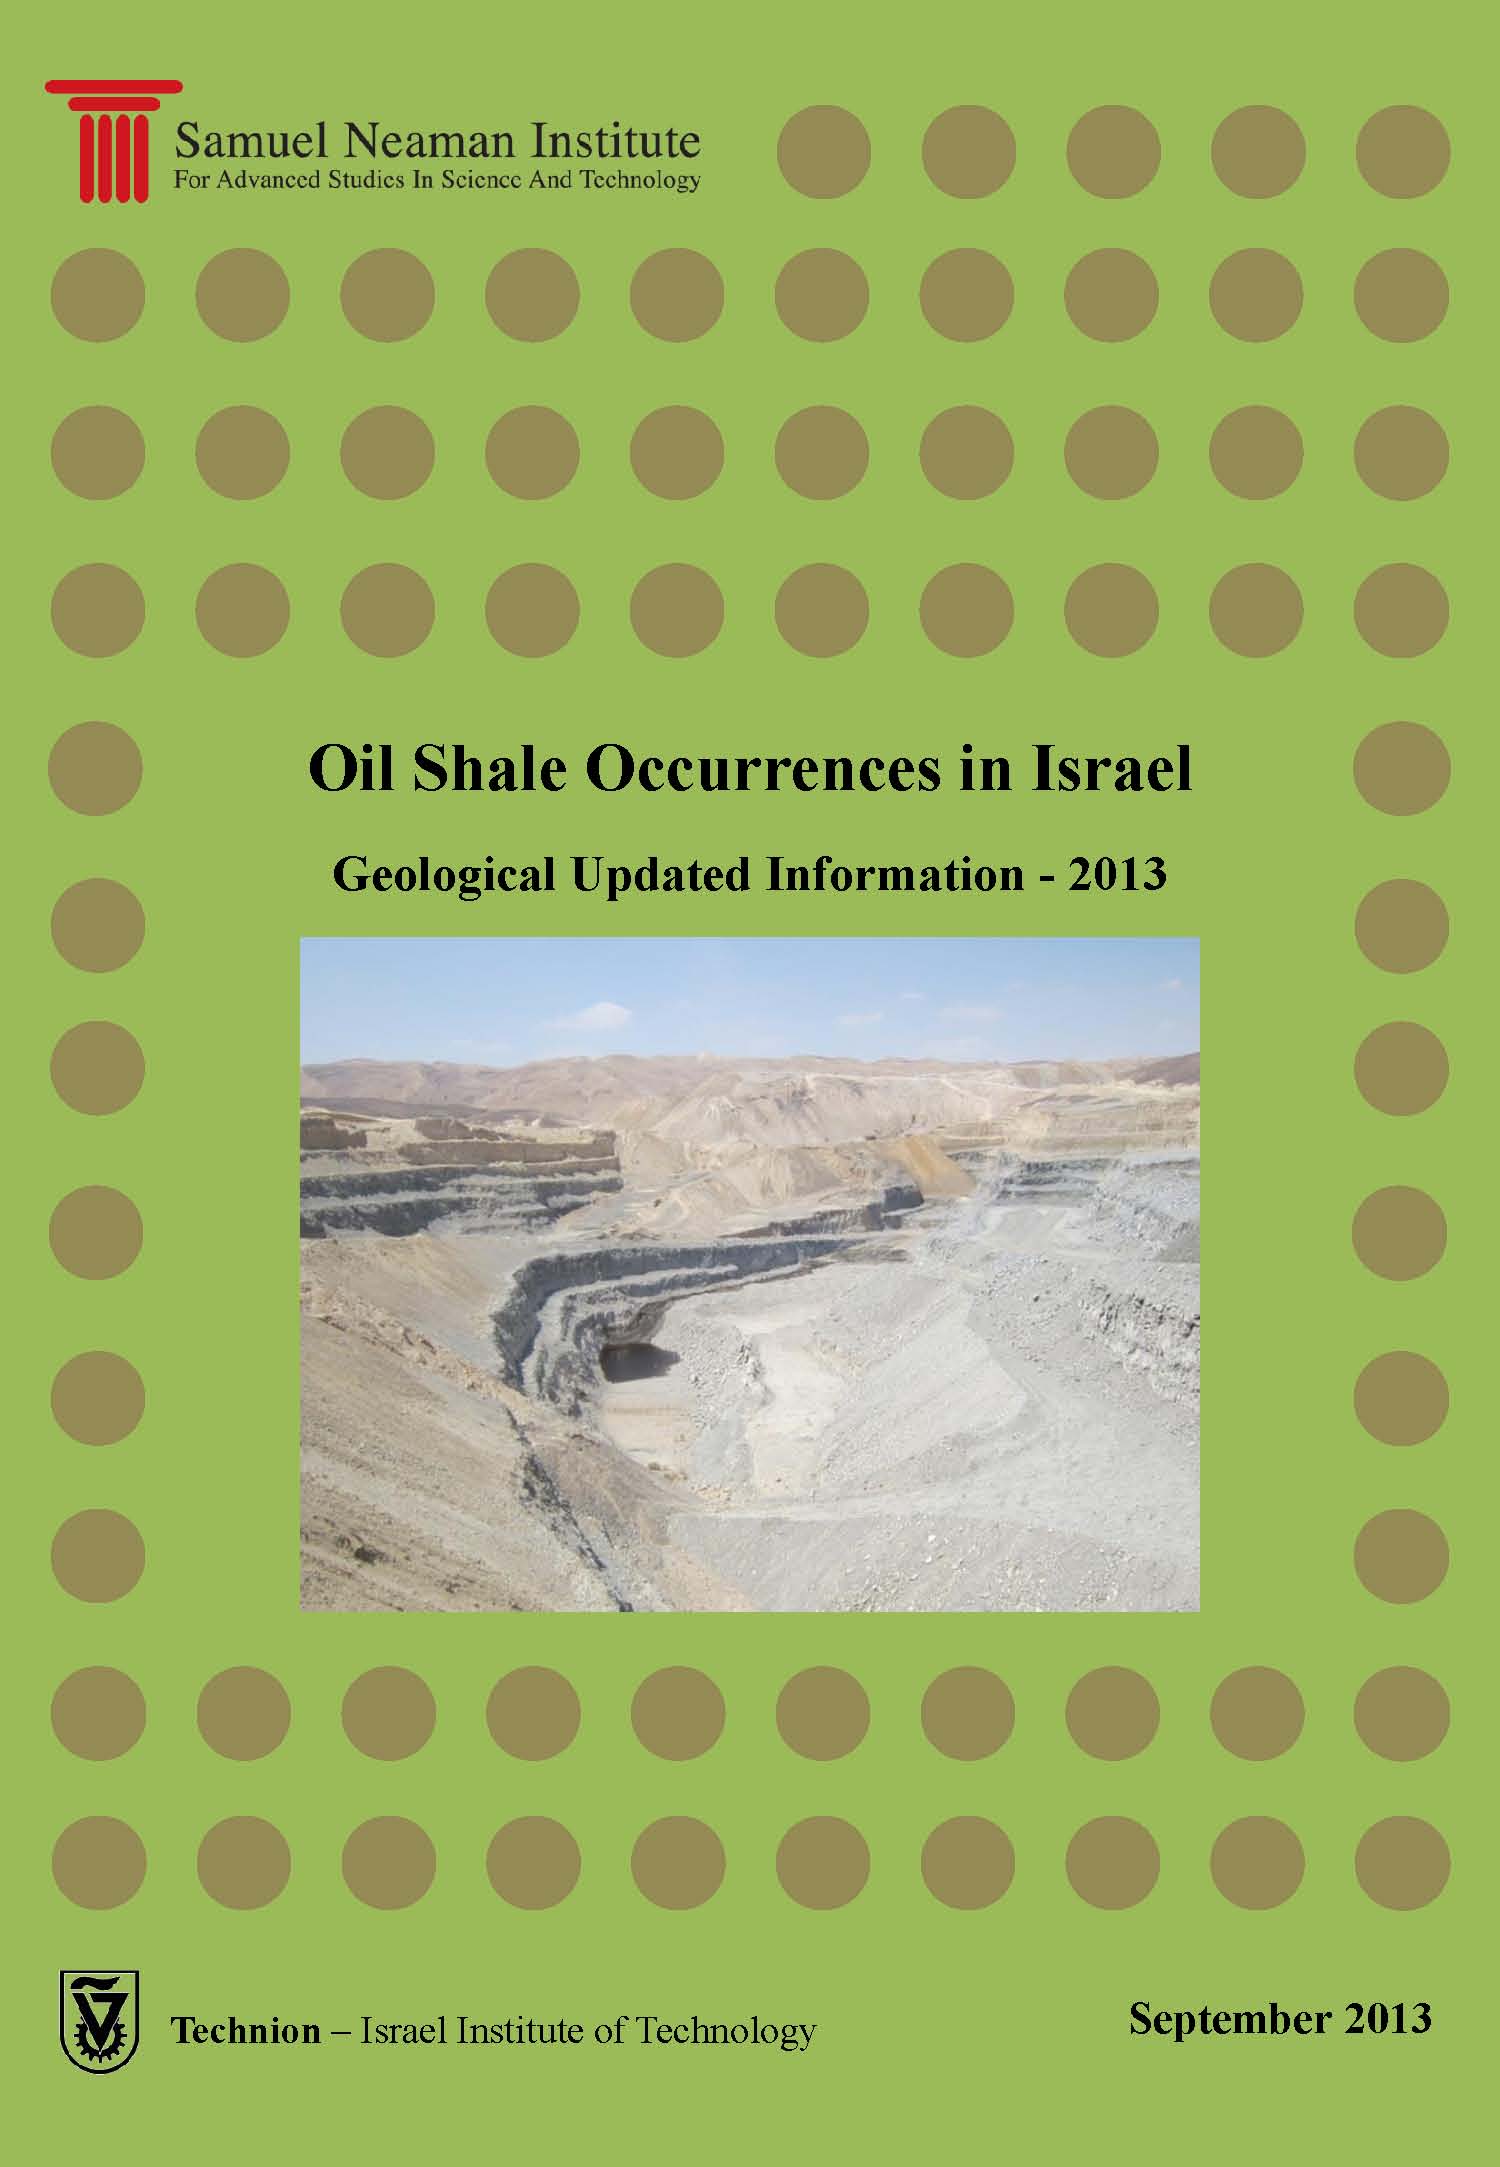 Oil Shale Occurrences in Israel - Geological Updated information